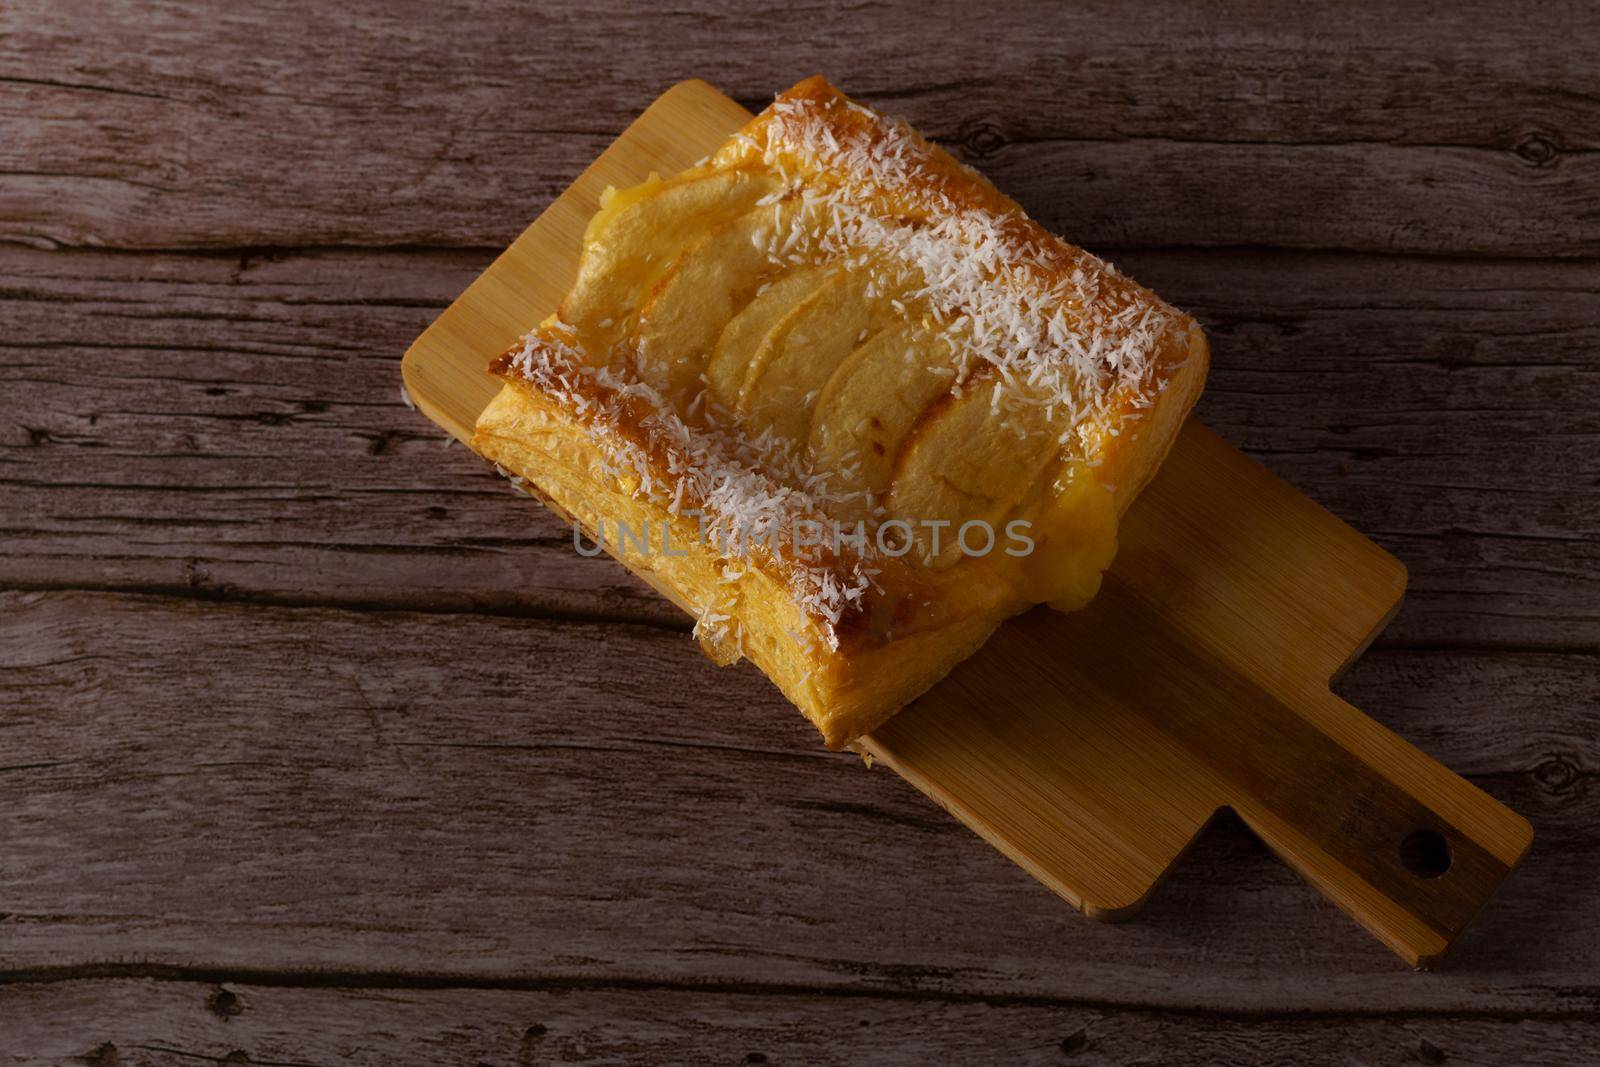 apple tartlet topped with syrup and shredded coconut, on a wooden board